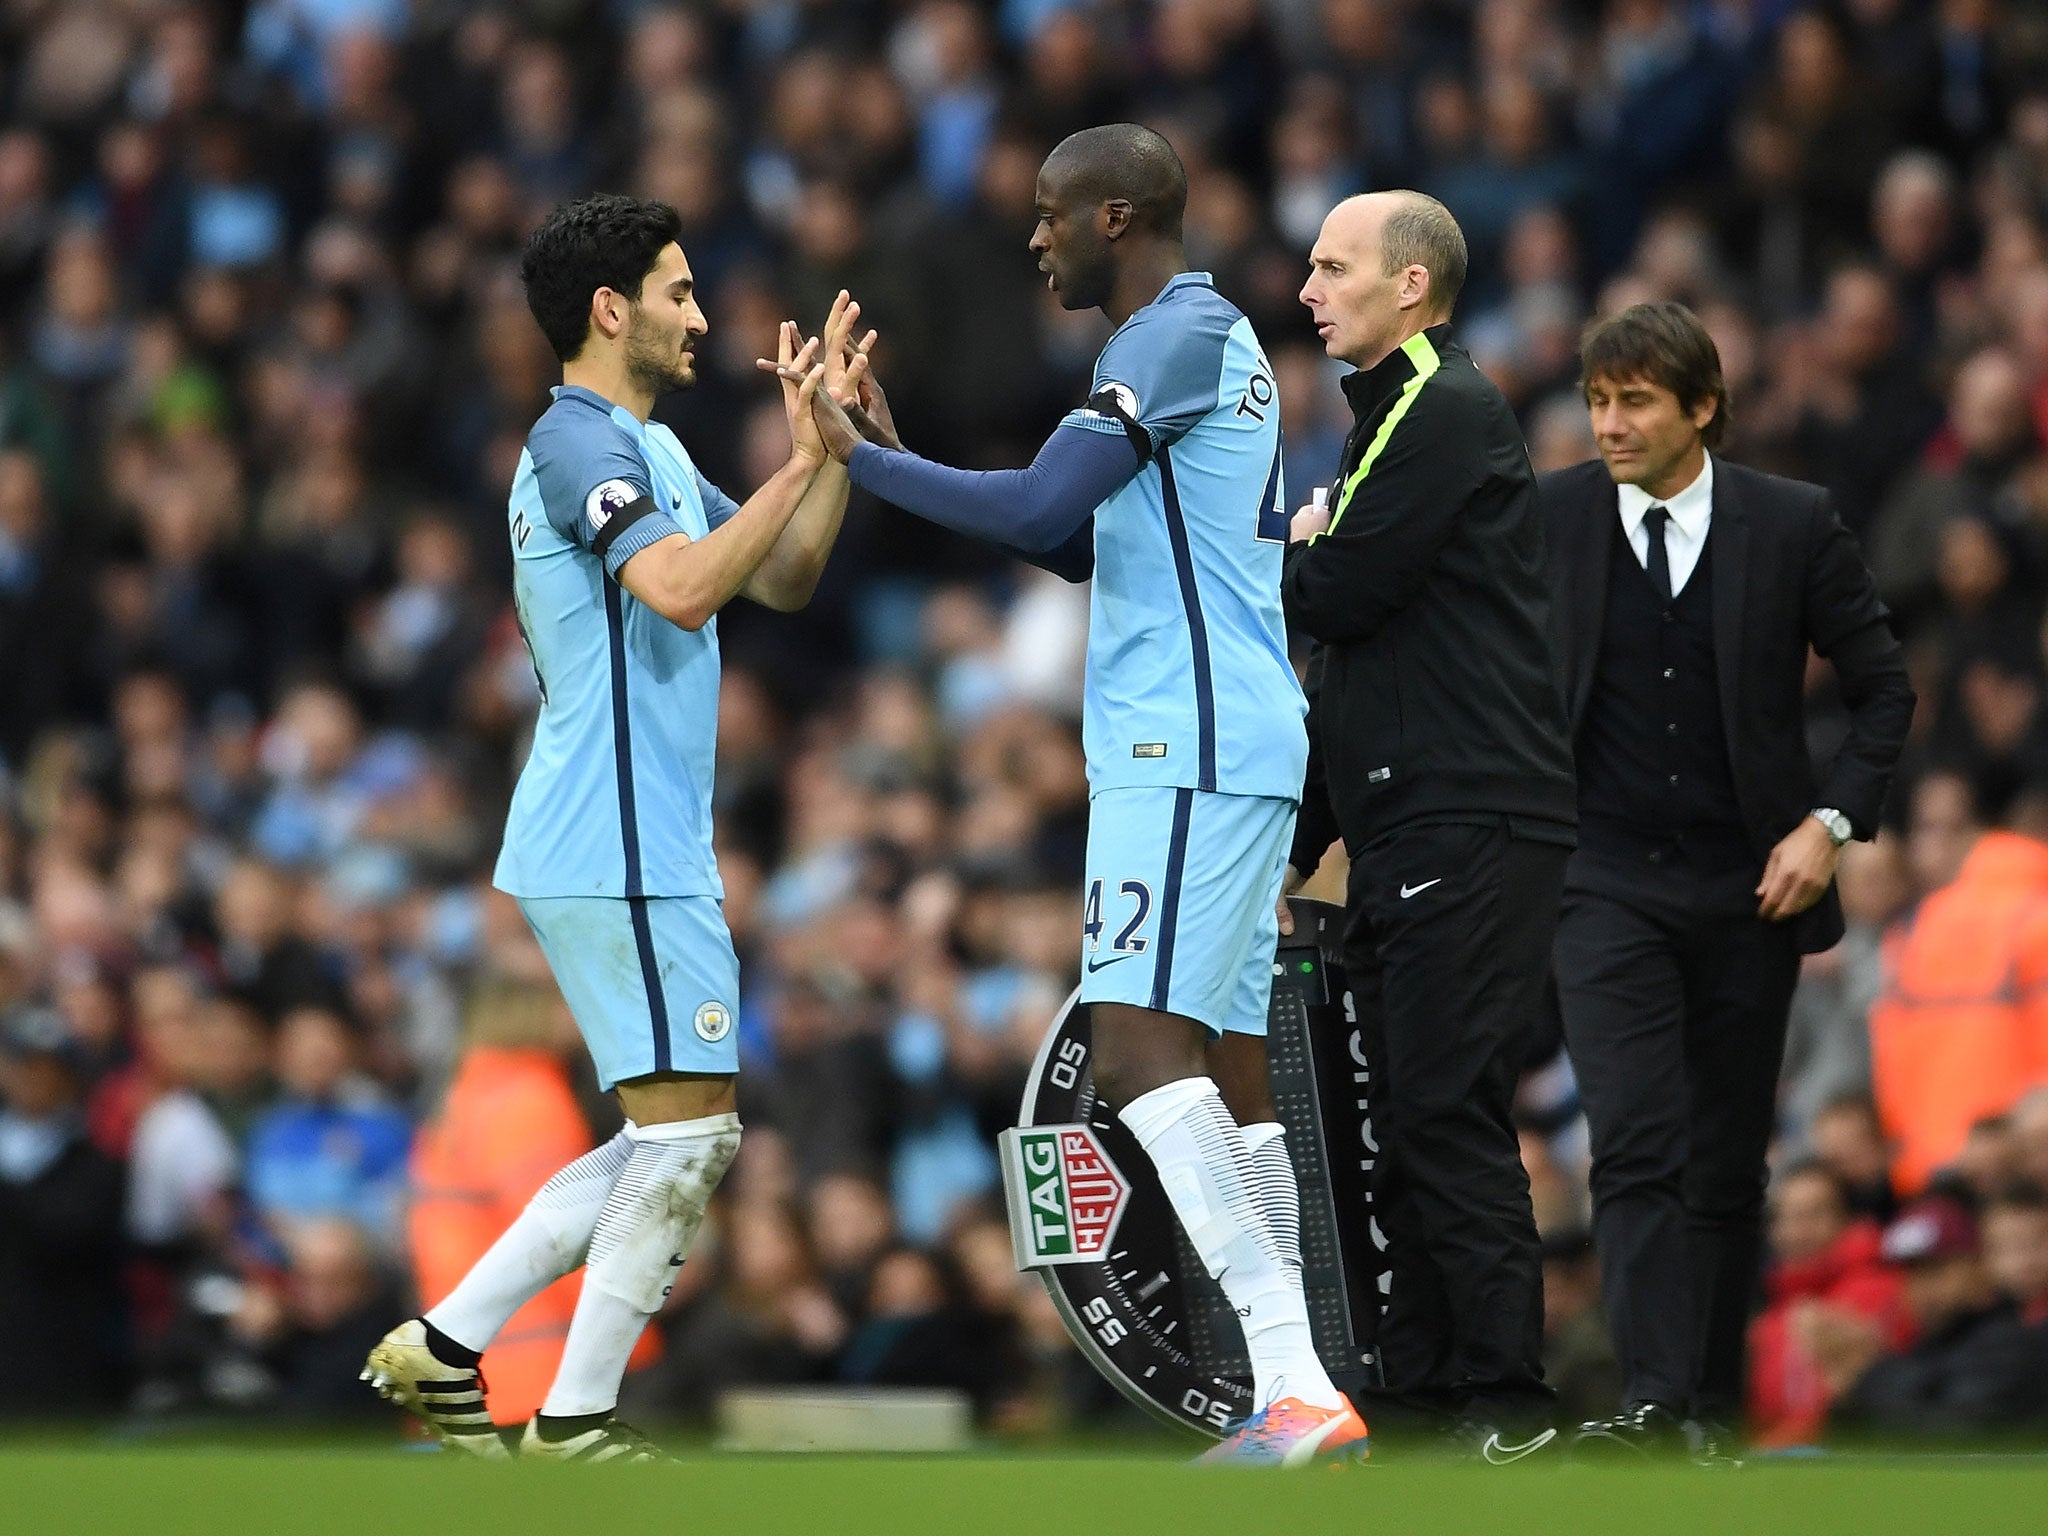 Toure's net income has reduced due to his absence from the Manchester City team under Pep Guardiola